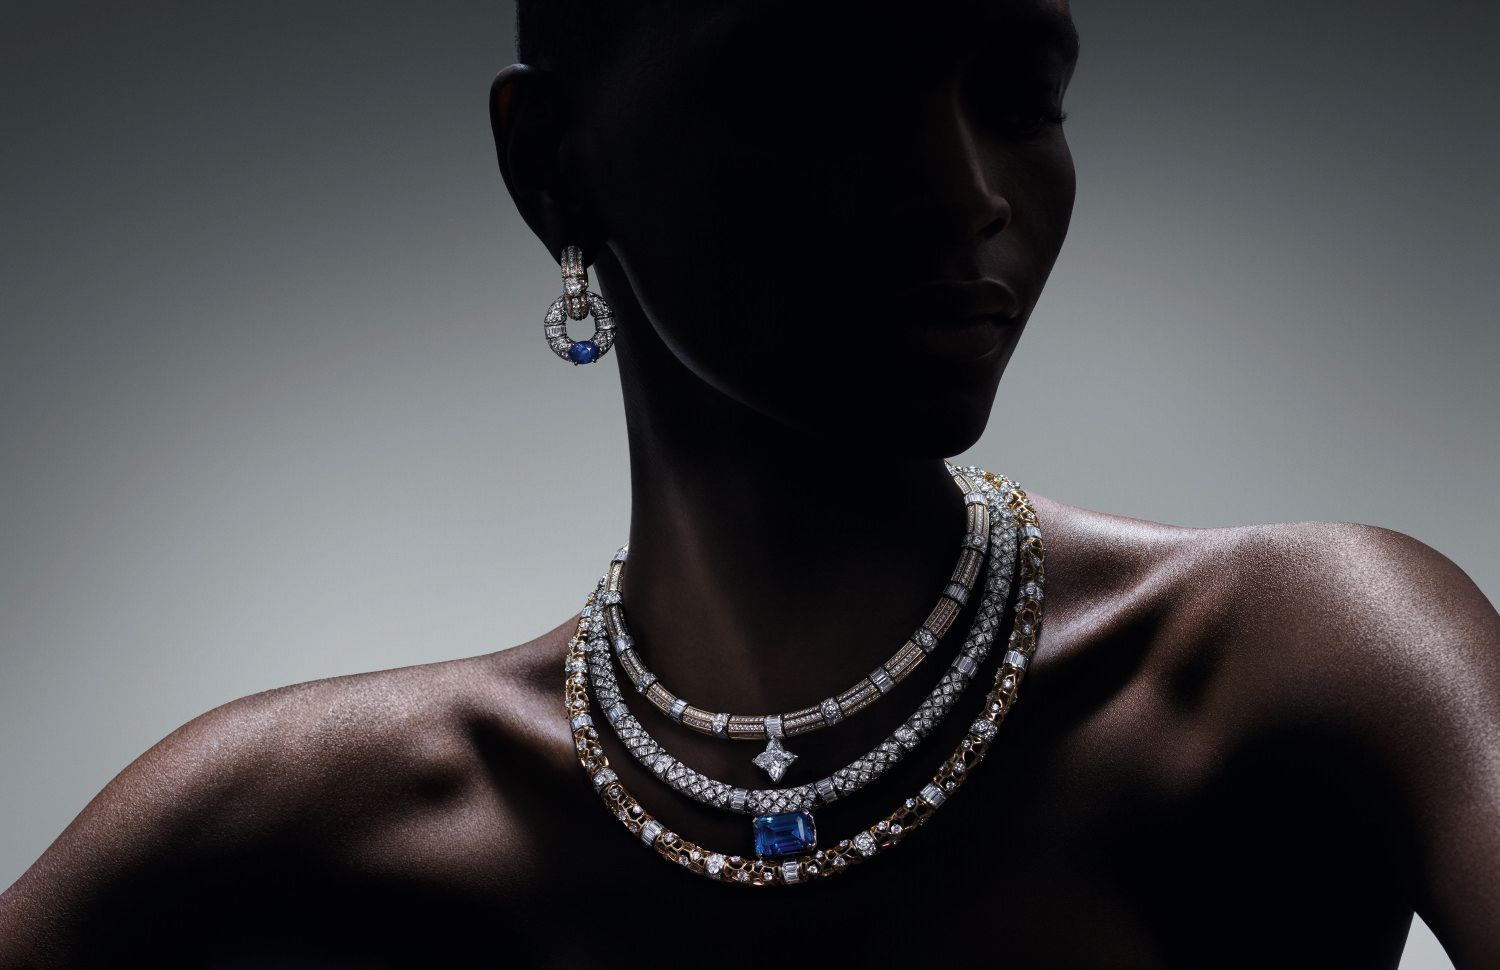 vuitton jewelry collection